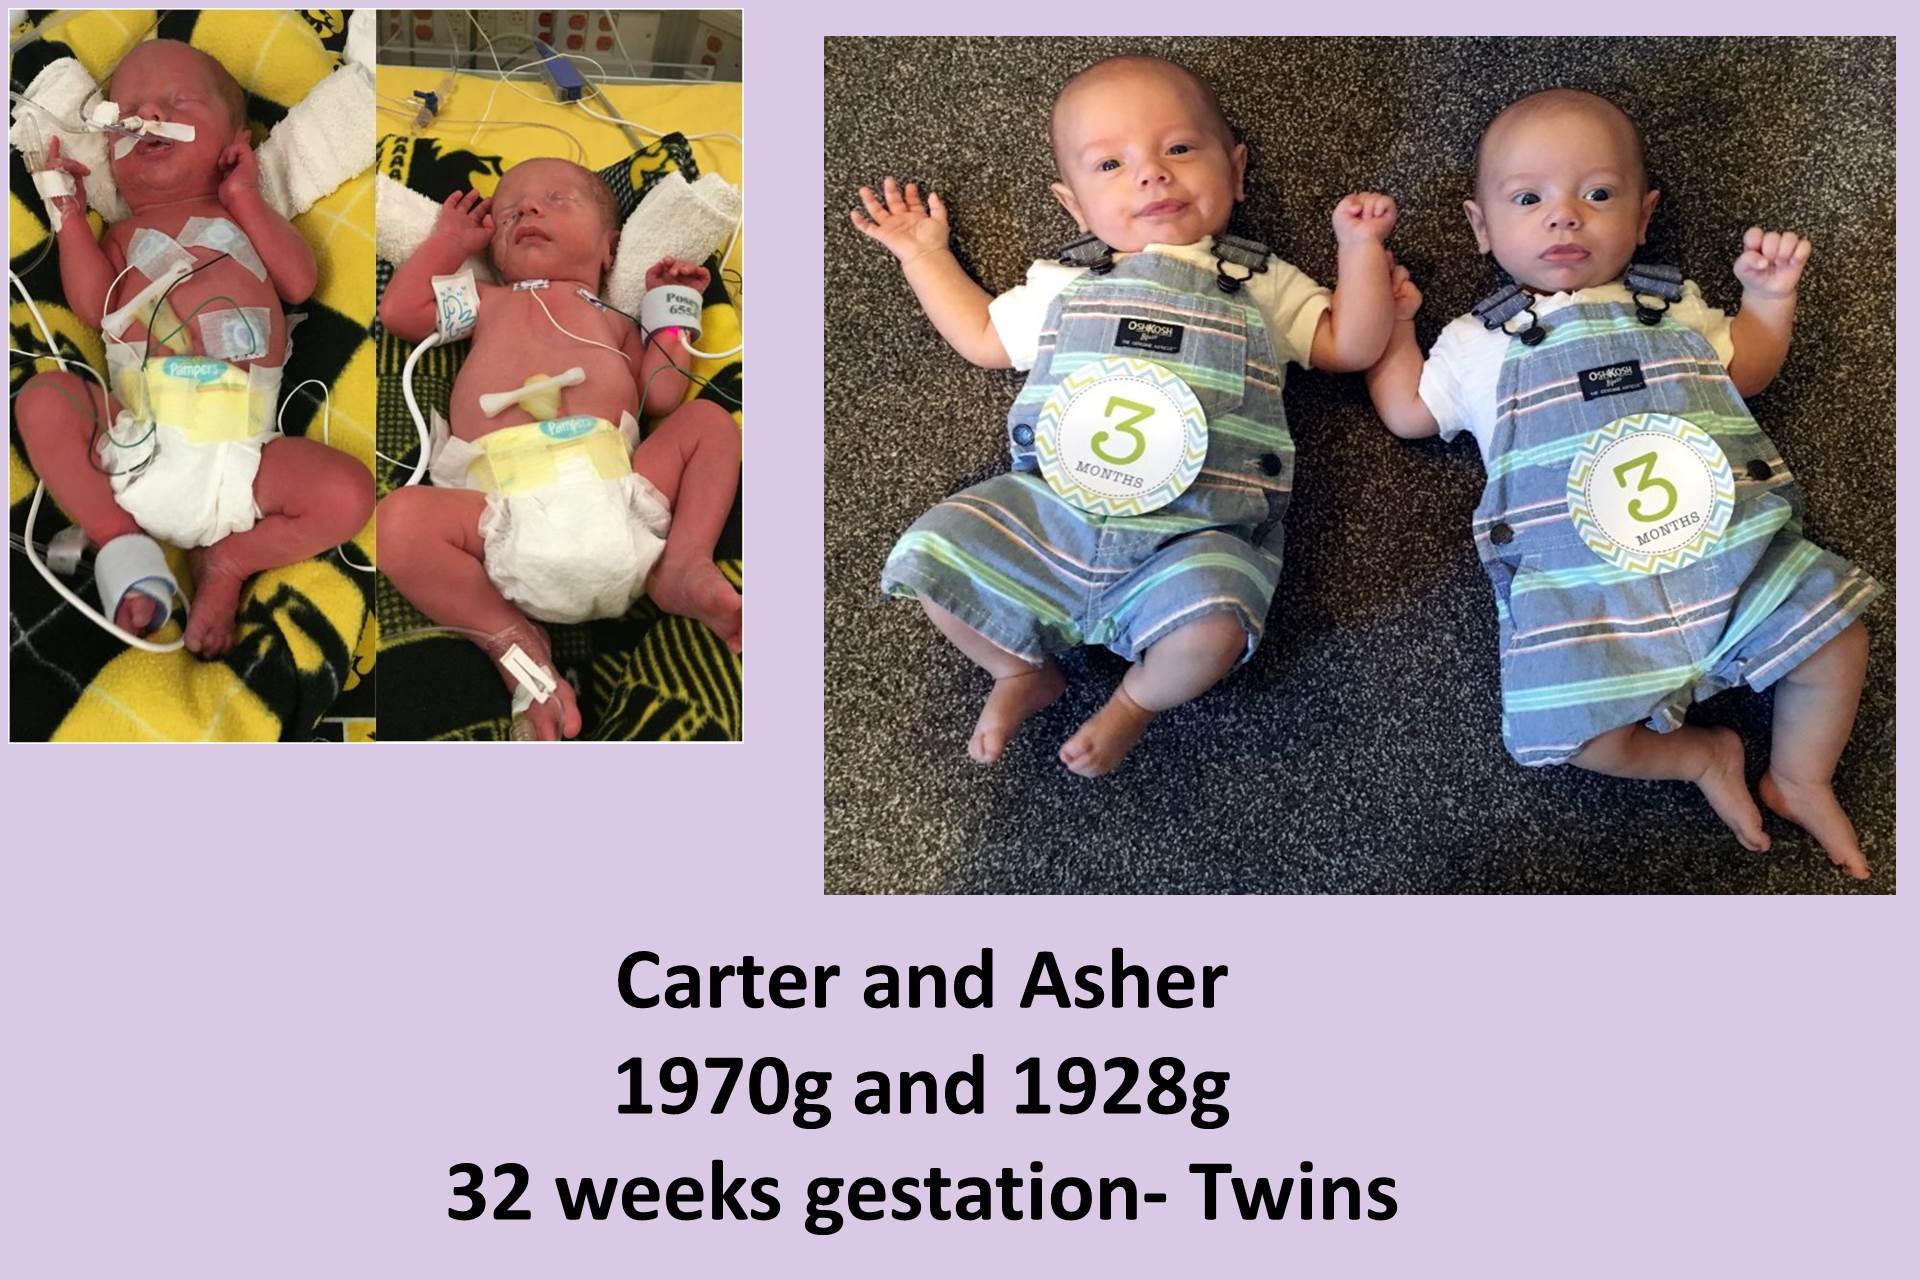 Hallway of Hope: Carter and Asher